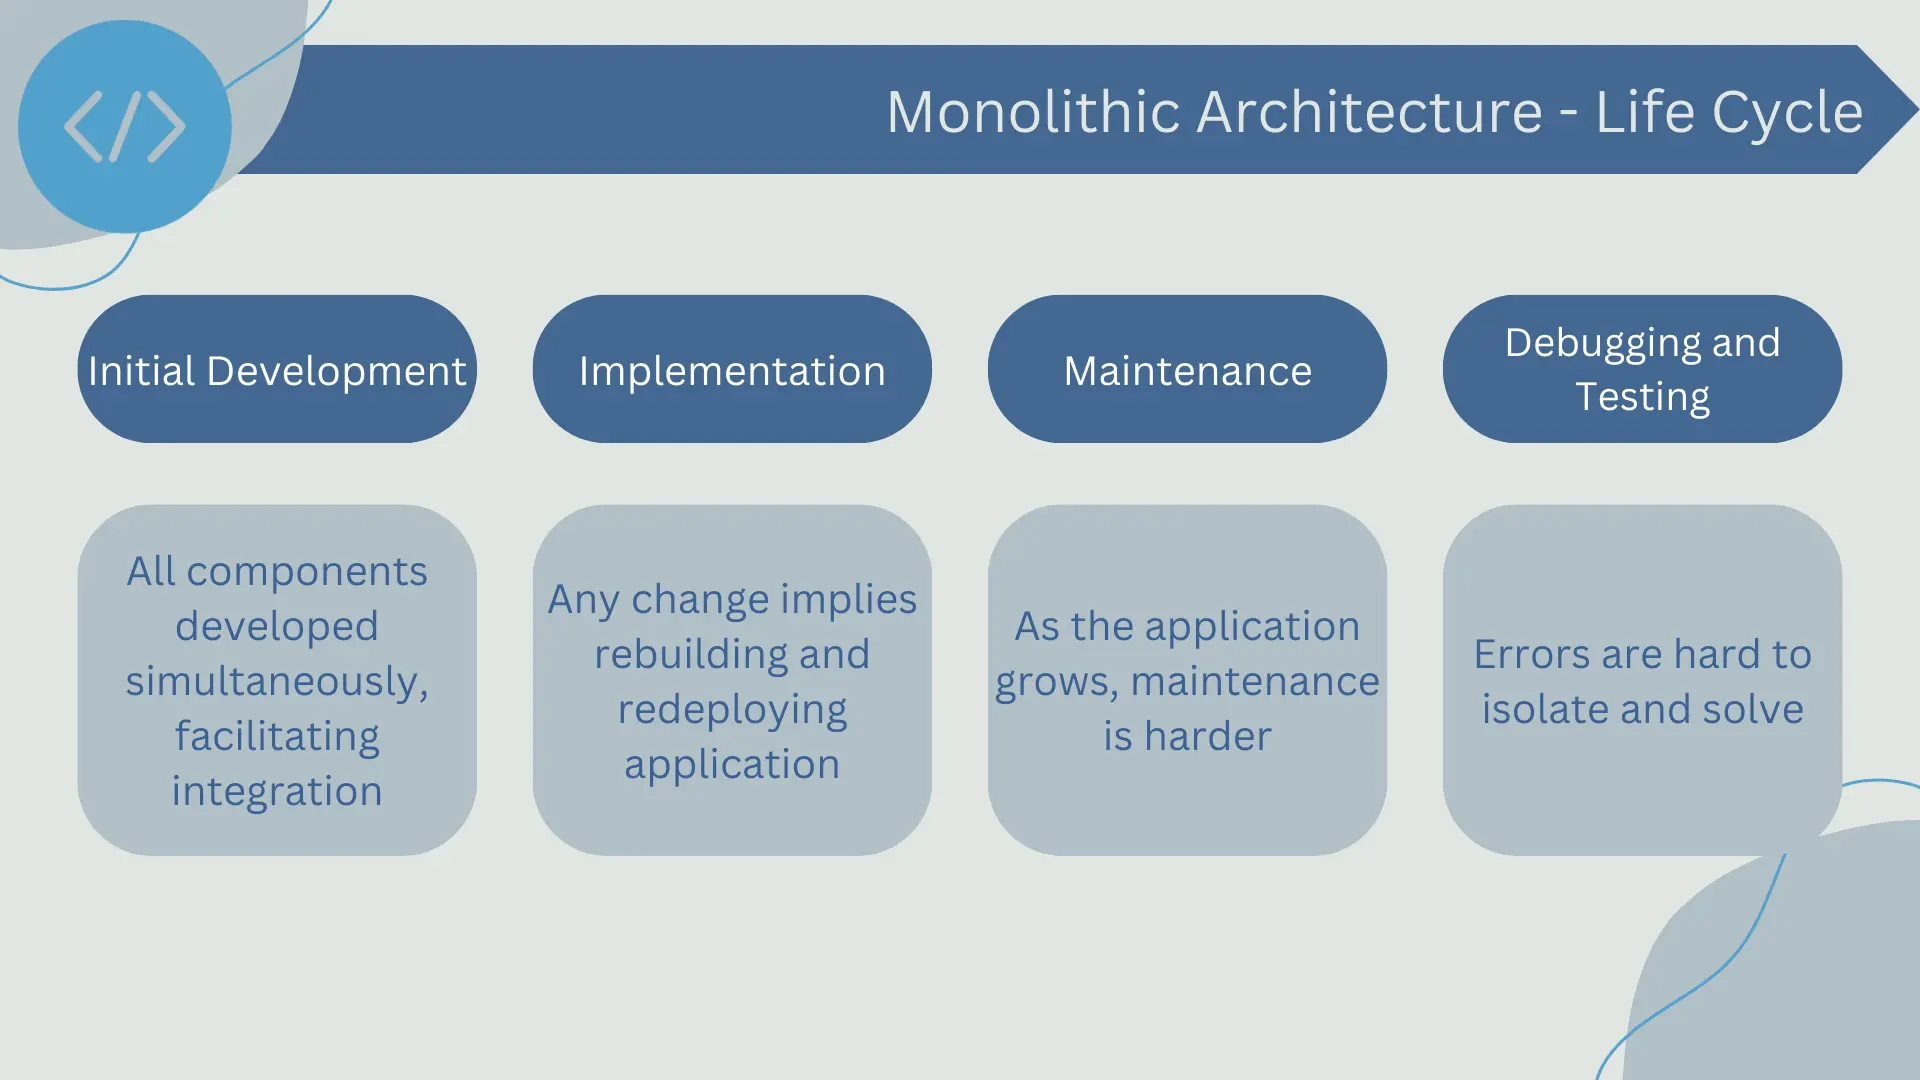 Life cycle in monolithic architecture